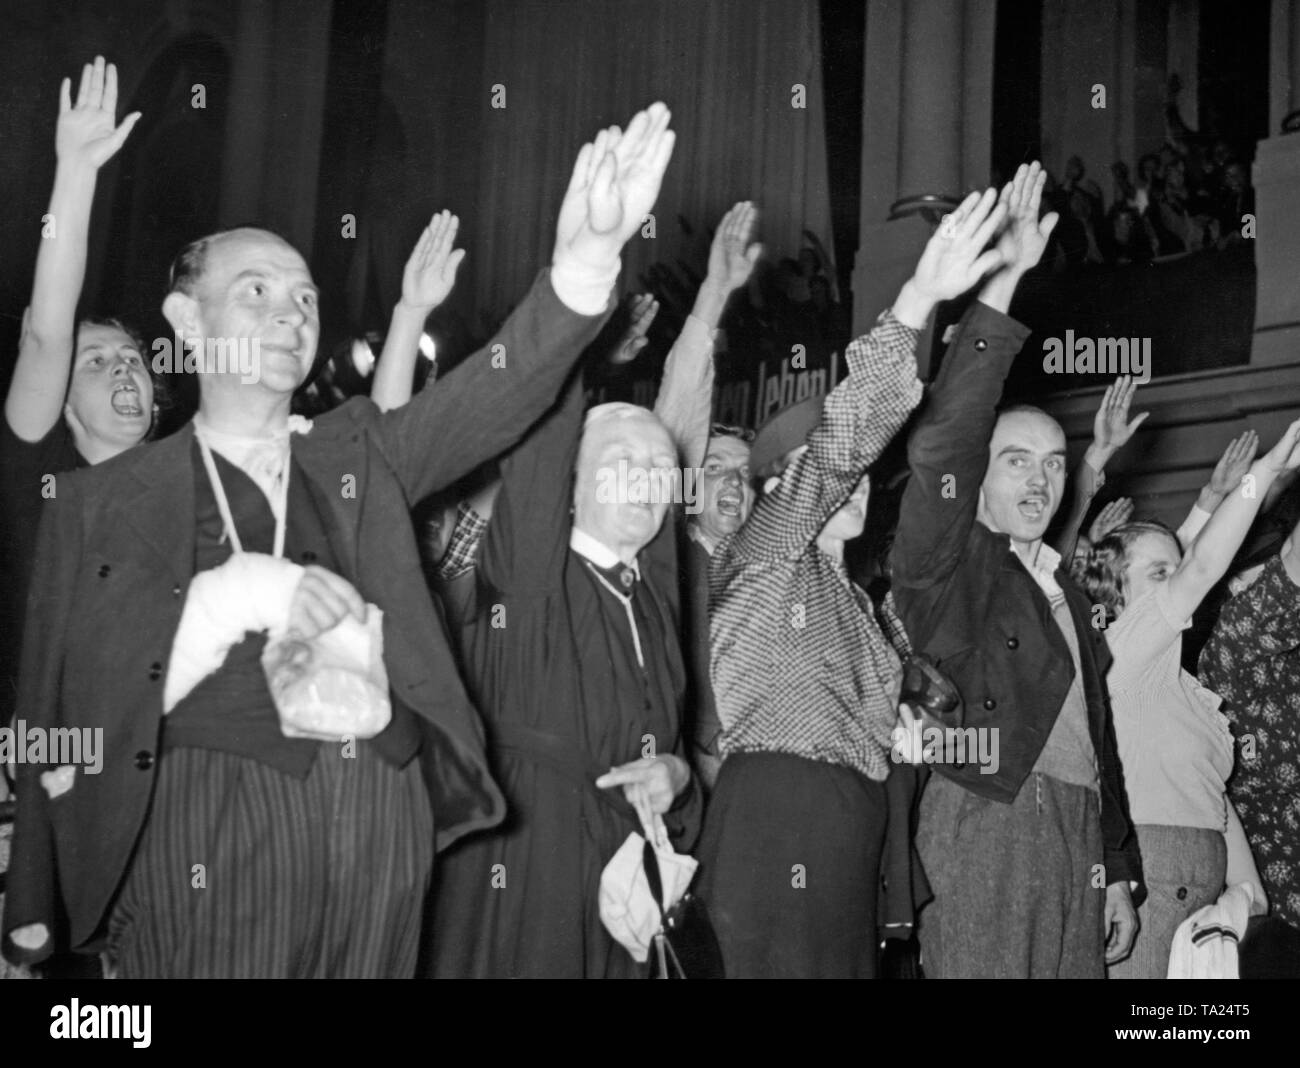 Refugees from the Sudetenland singing the 'Deutsche Lieder' ('German Songs') at a rally in the Staedtischer Austellungspalast (Municipal Exhibition Palace) in Dresden on October 19, 1938. Stock Photo